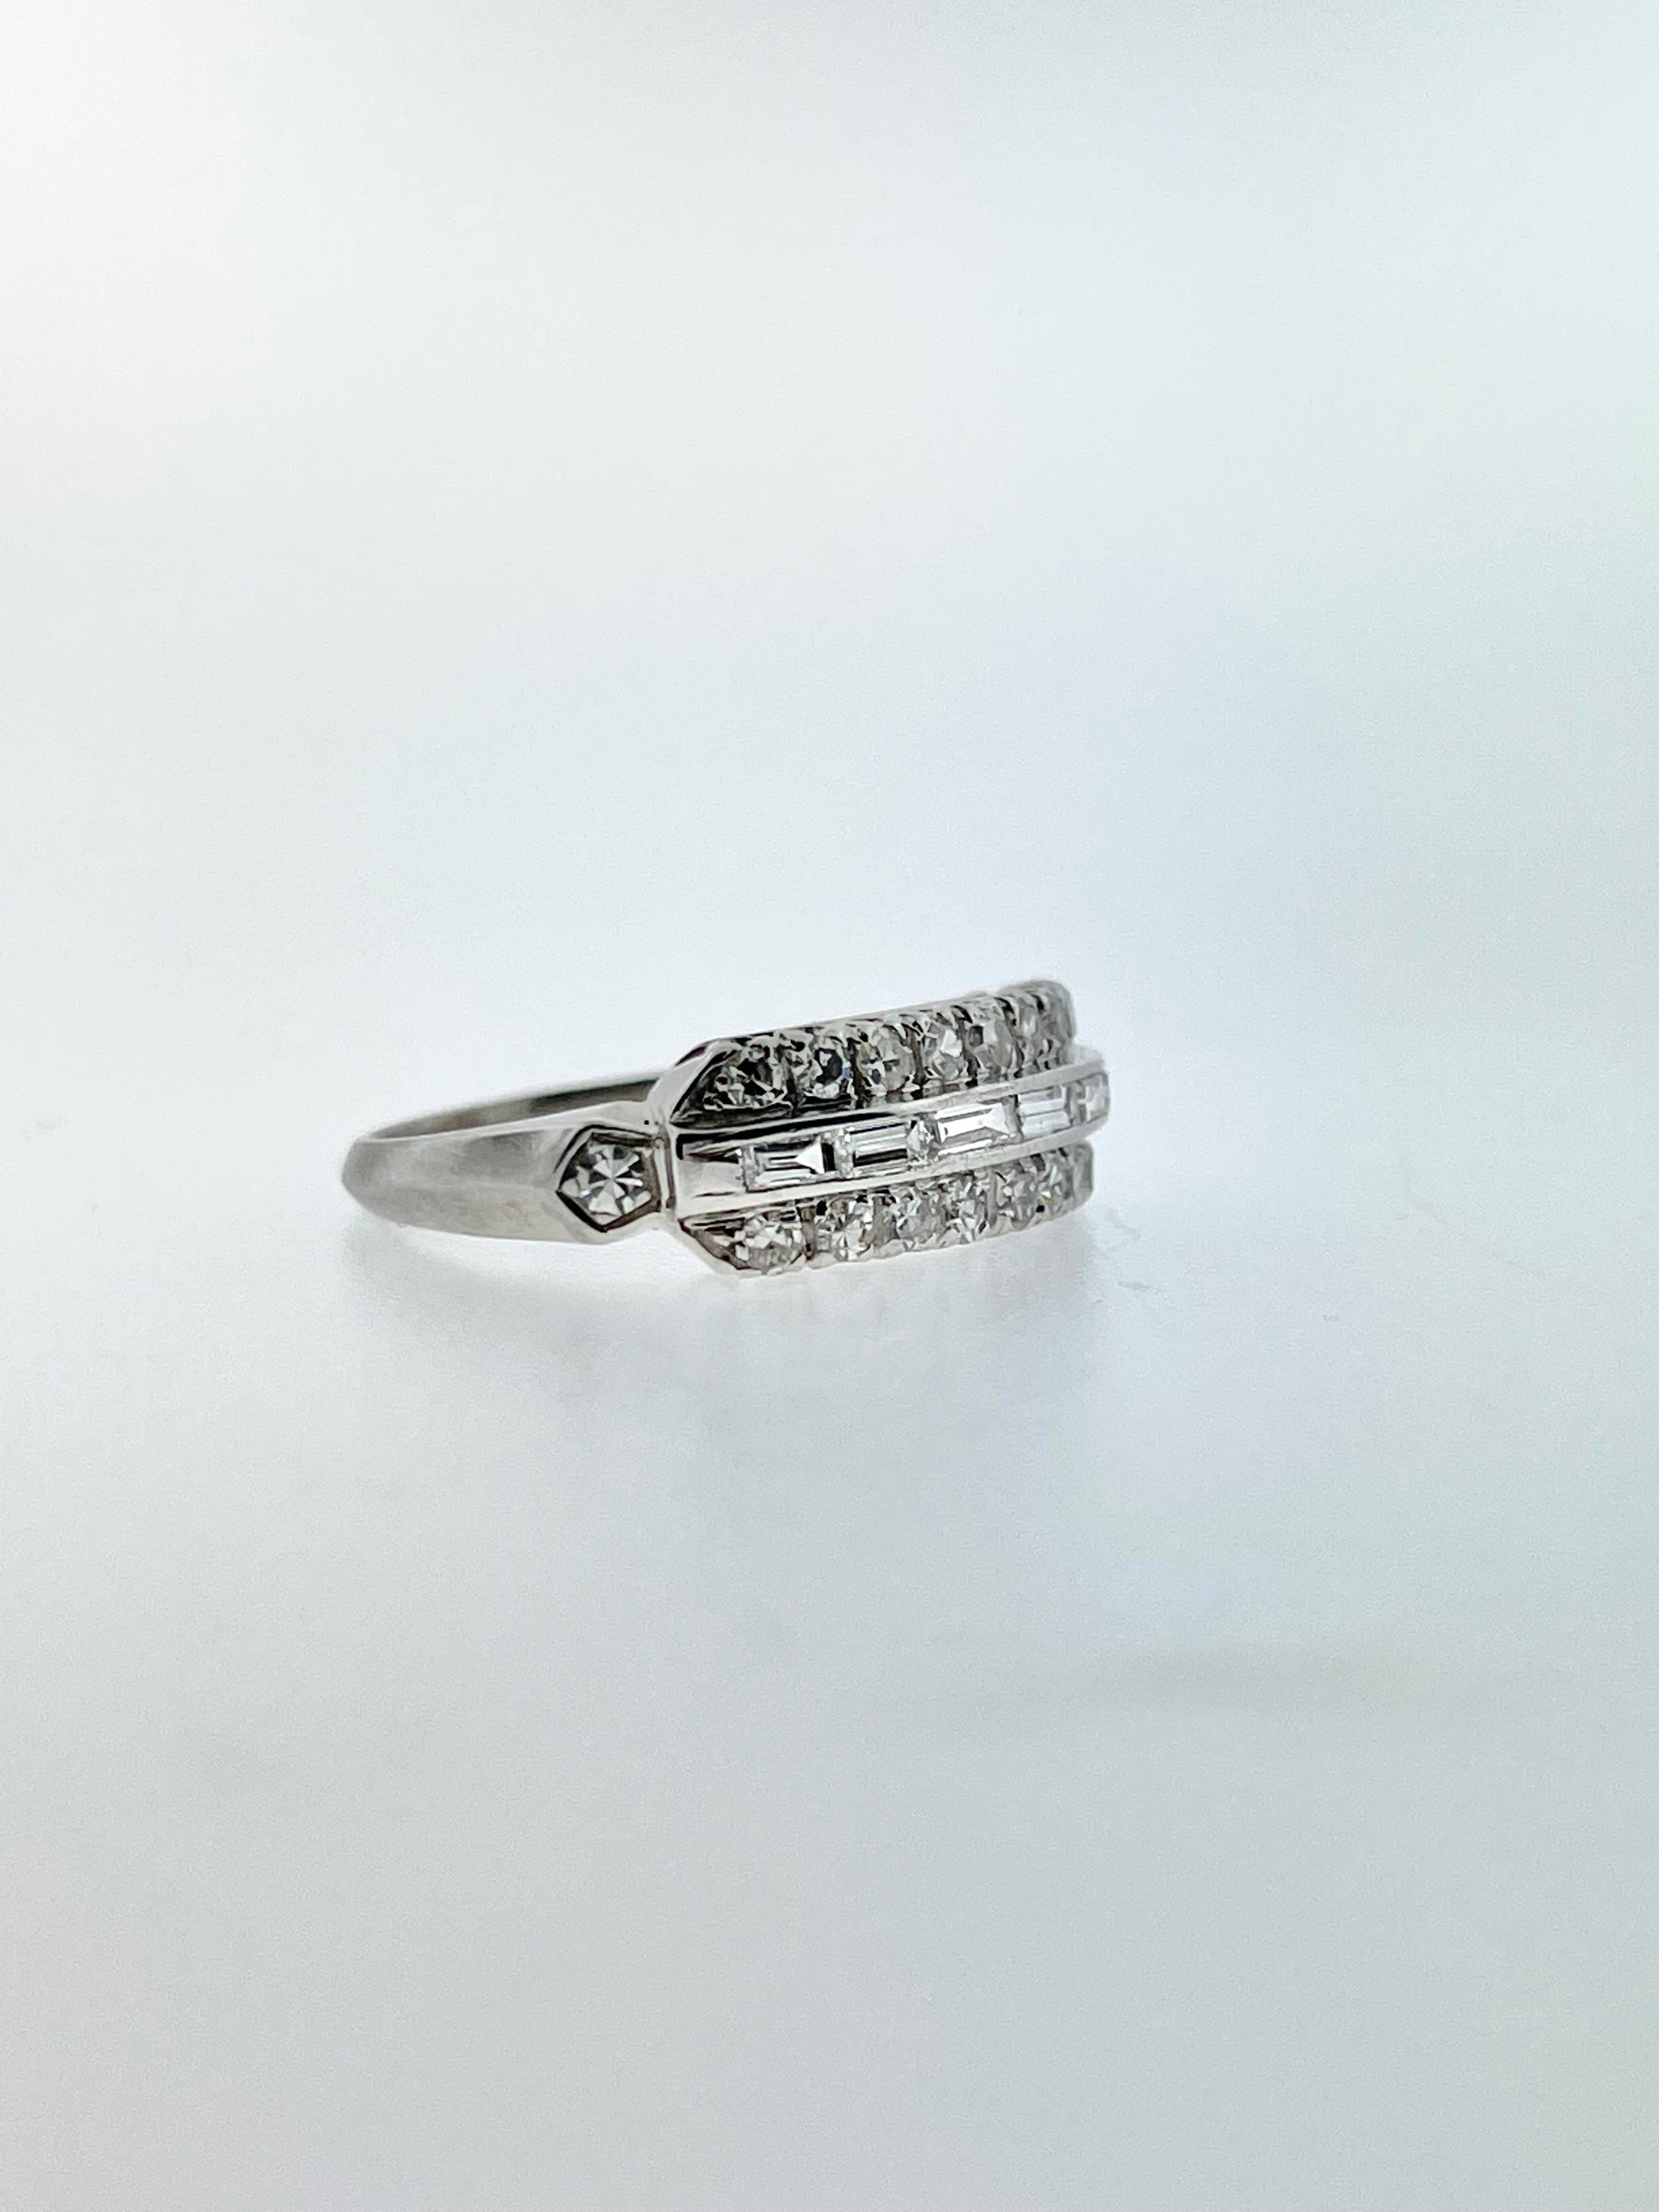 A beautiful vintage ring with stunning round and baguette diamonds all set in platinum! 